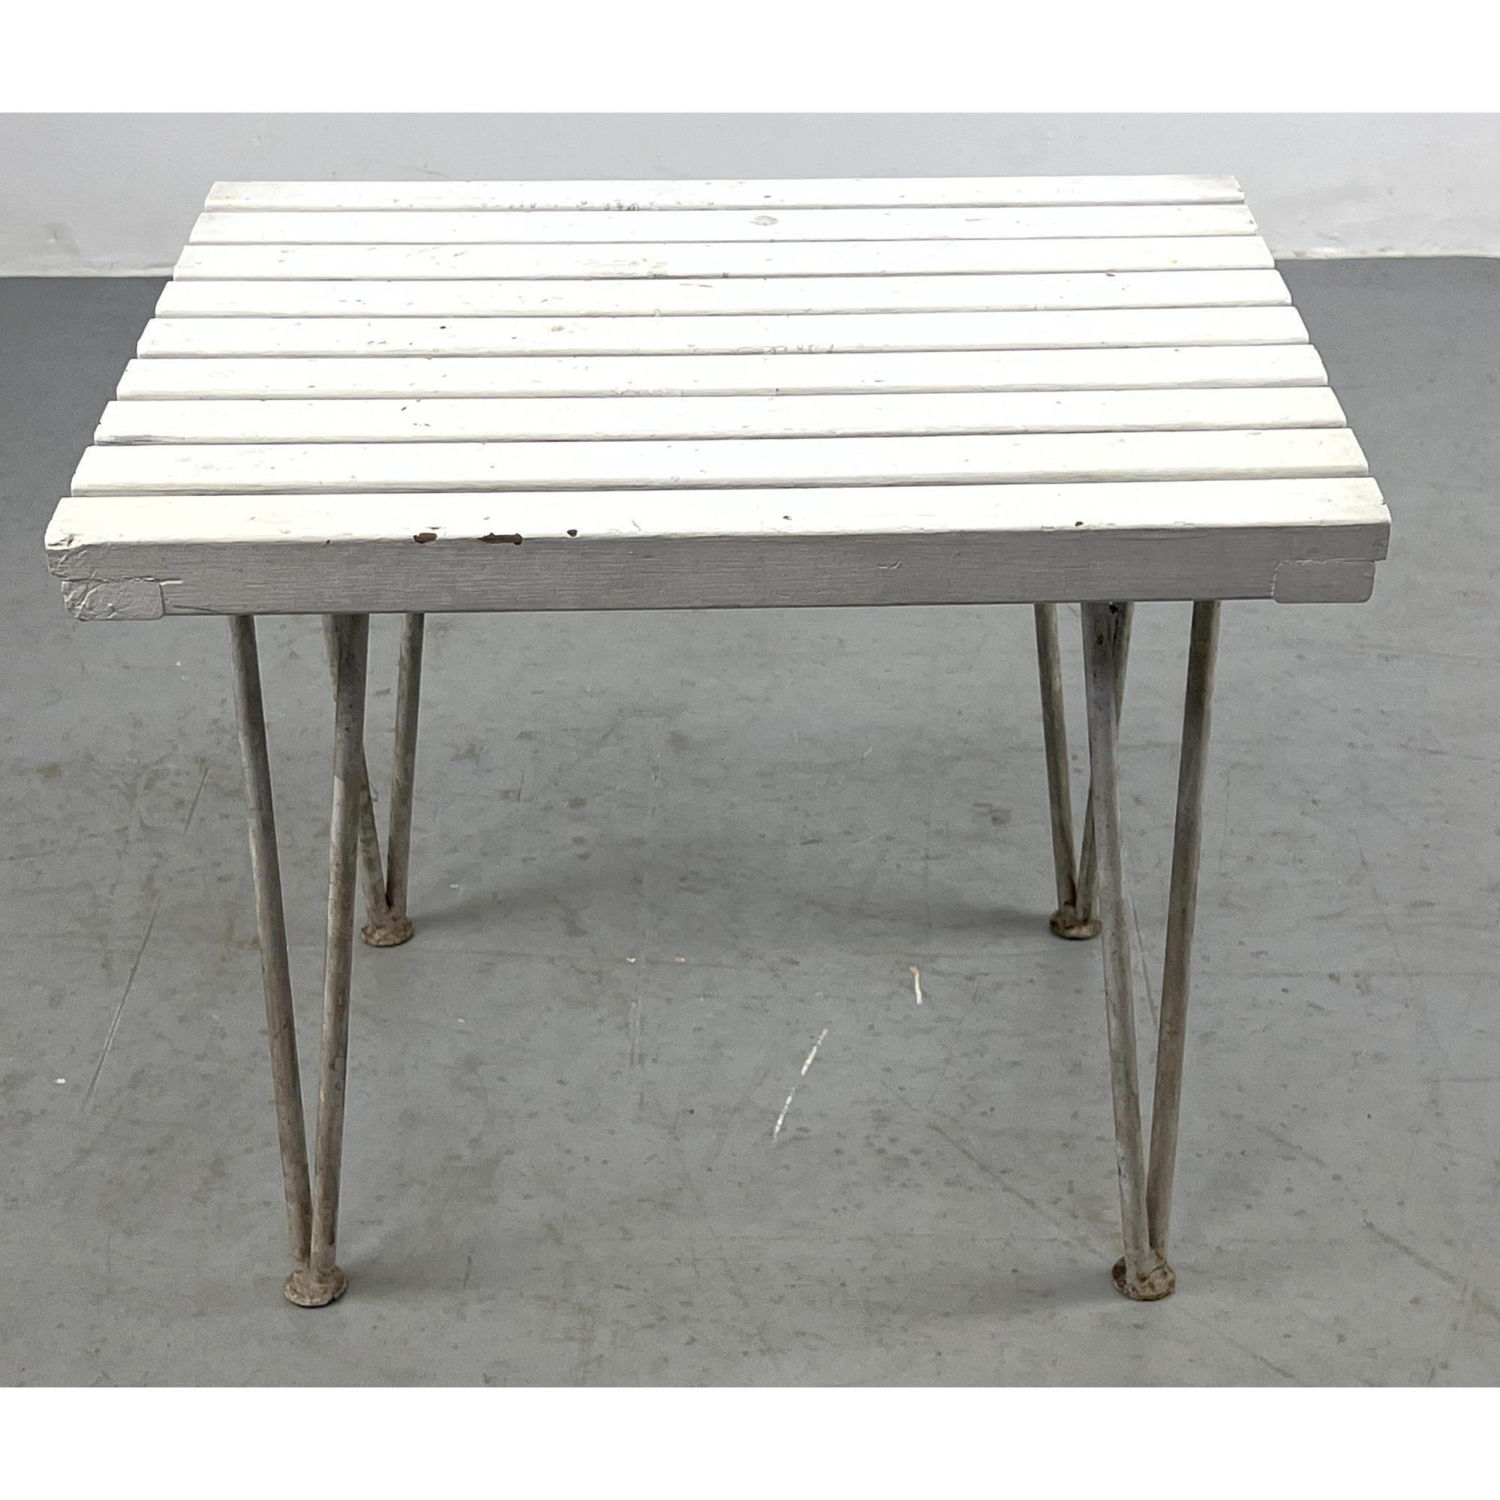 Painted White Slat Top Table. Painted